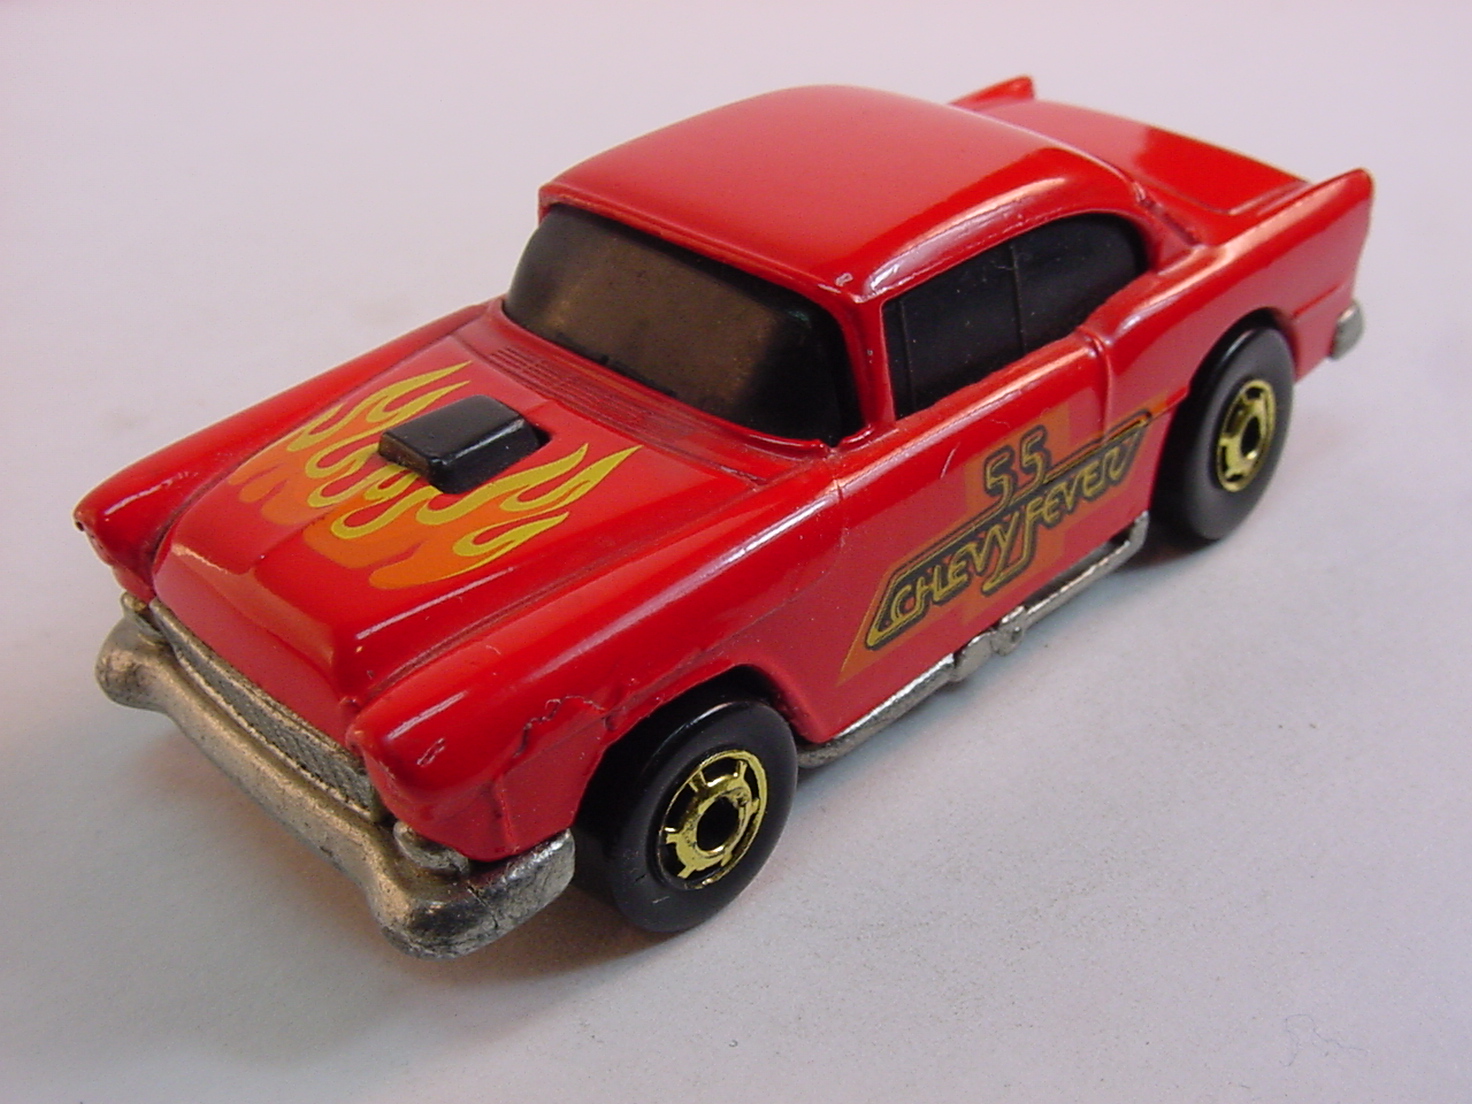 Details about   Hot Wheels Blackwall Color Racer '55 CHEVY Pink NM/M Very Clean !! 